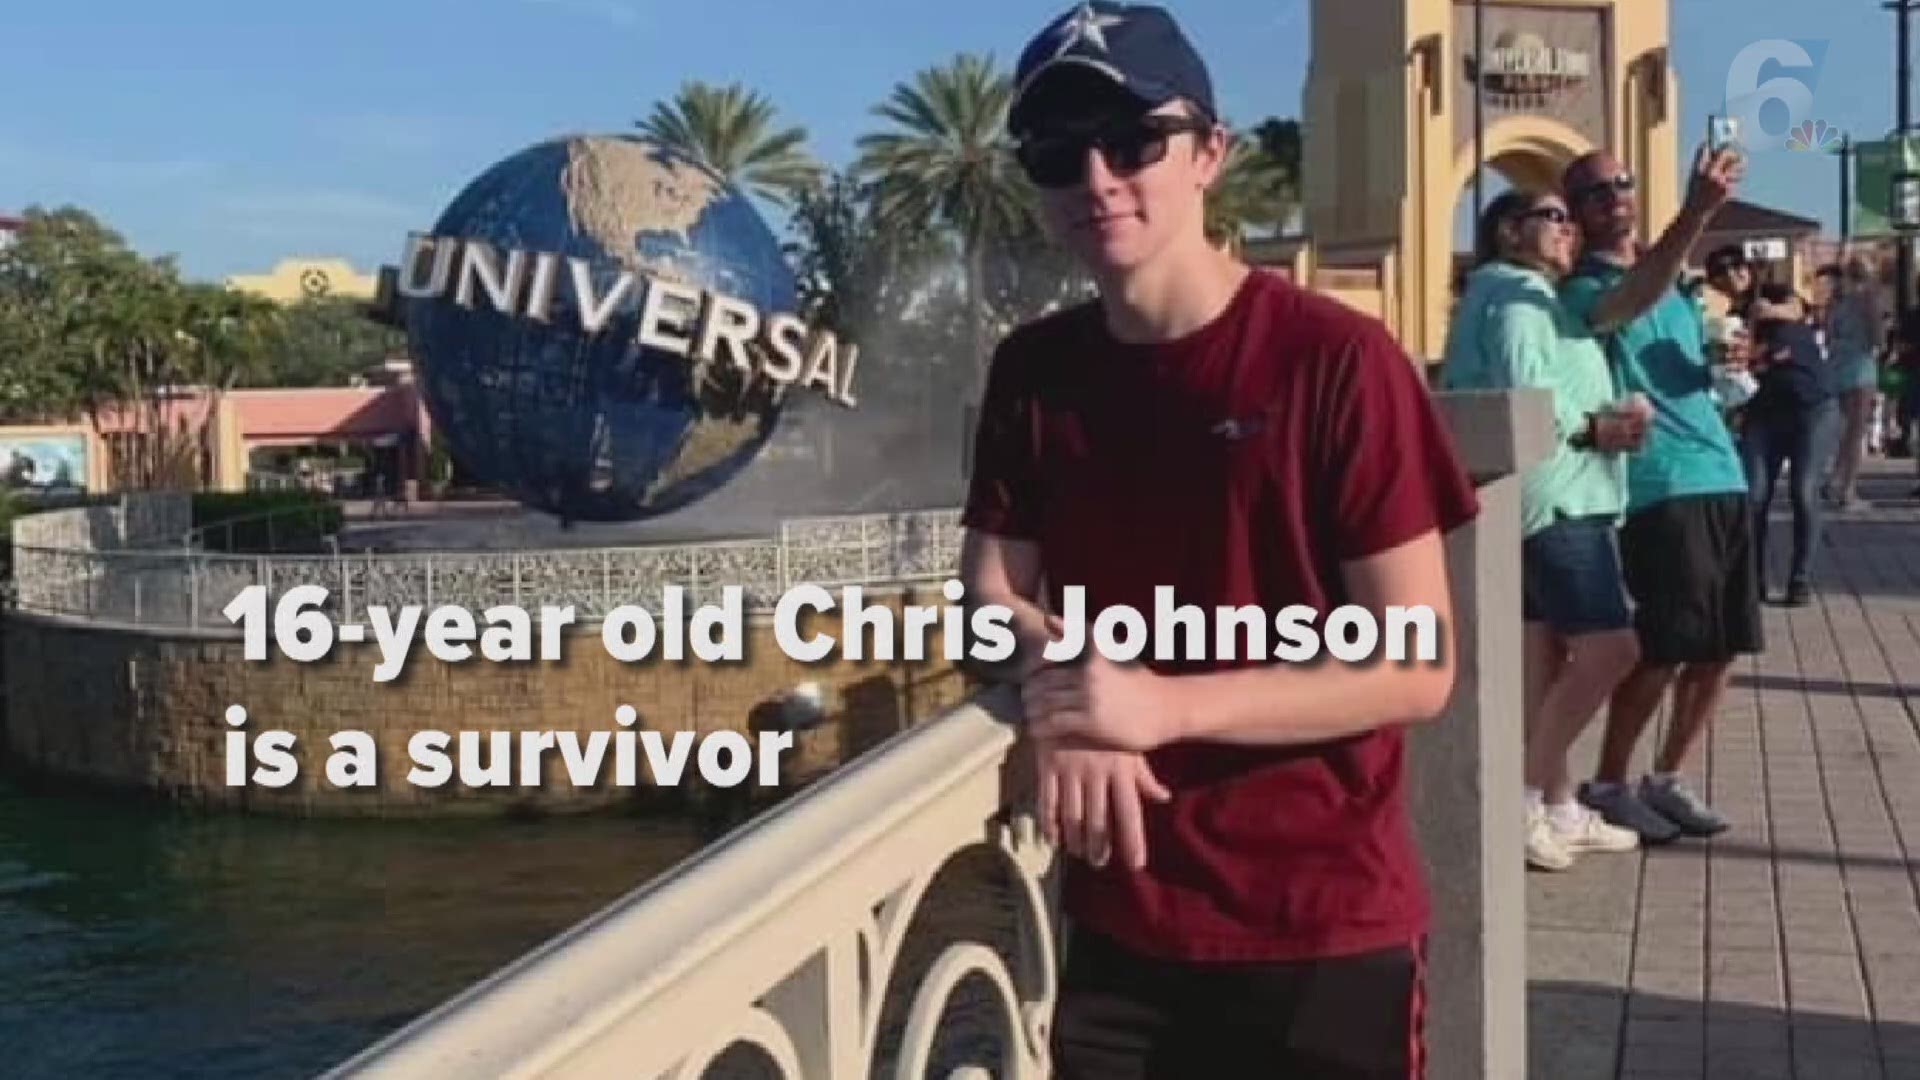 Christopher Johnson's mom, Crystal Whalen, said her son is having his fourth surgery this Friday, June 11 -- which is his 17th birthday -- with courage and hope.